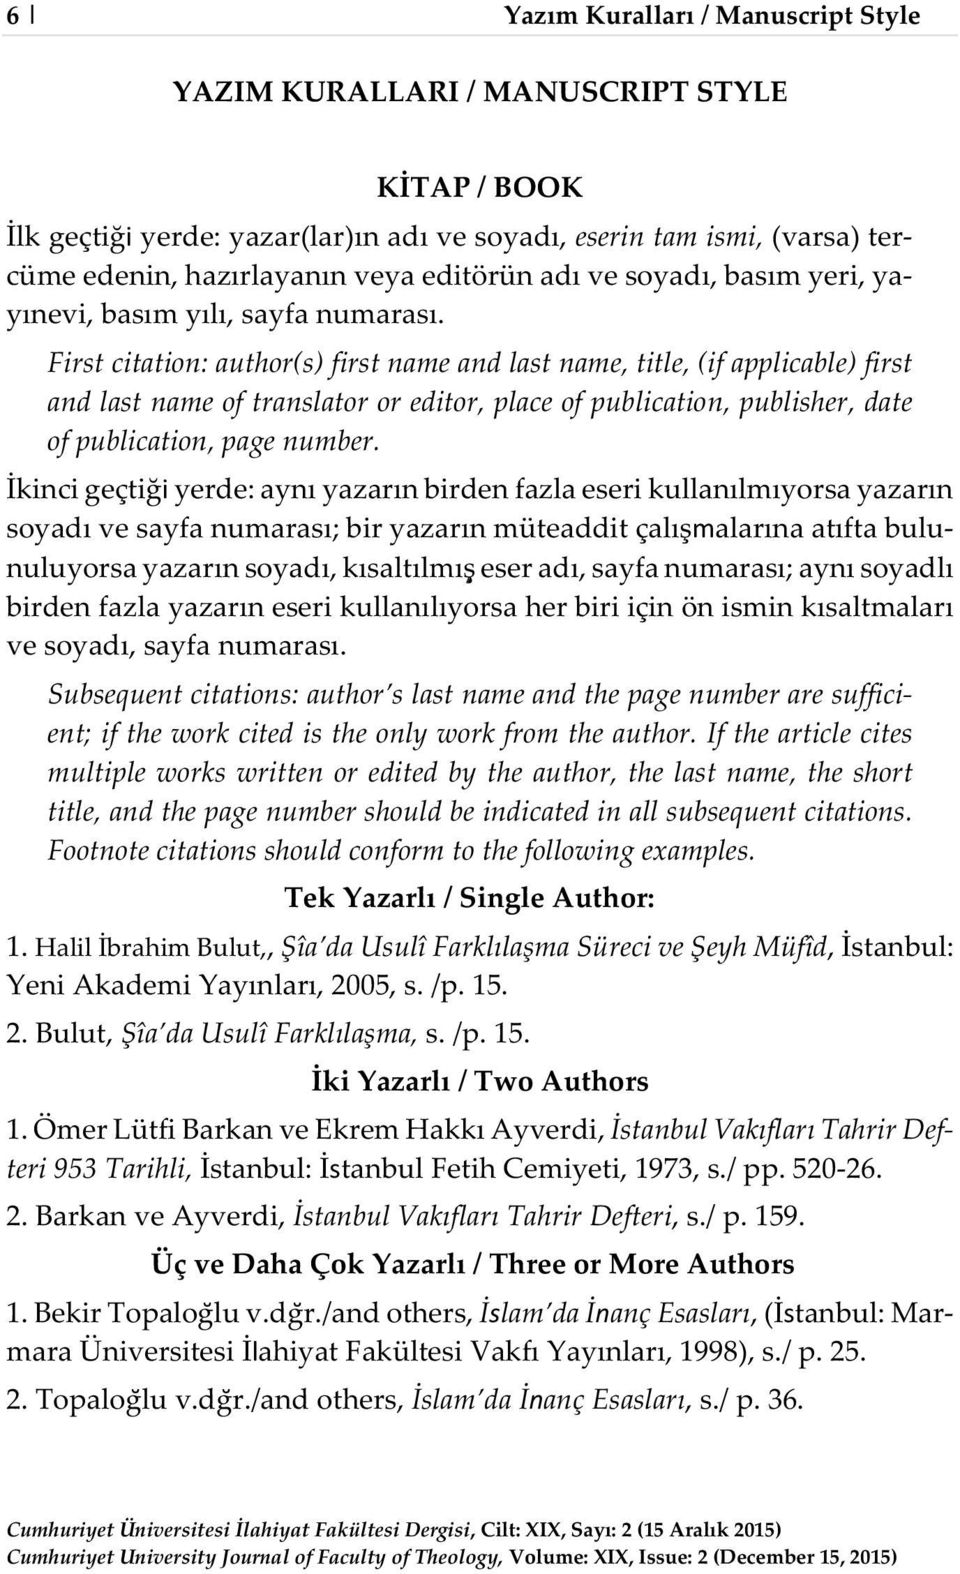 First citation: author(s) first name and last name, title, (if applicable) first and last name of translator or editor, place of publication, publisher, date of publication, page number.